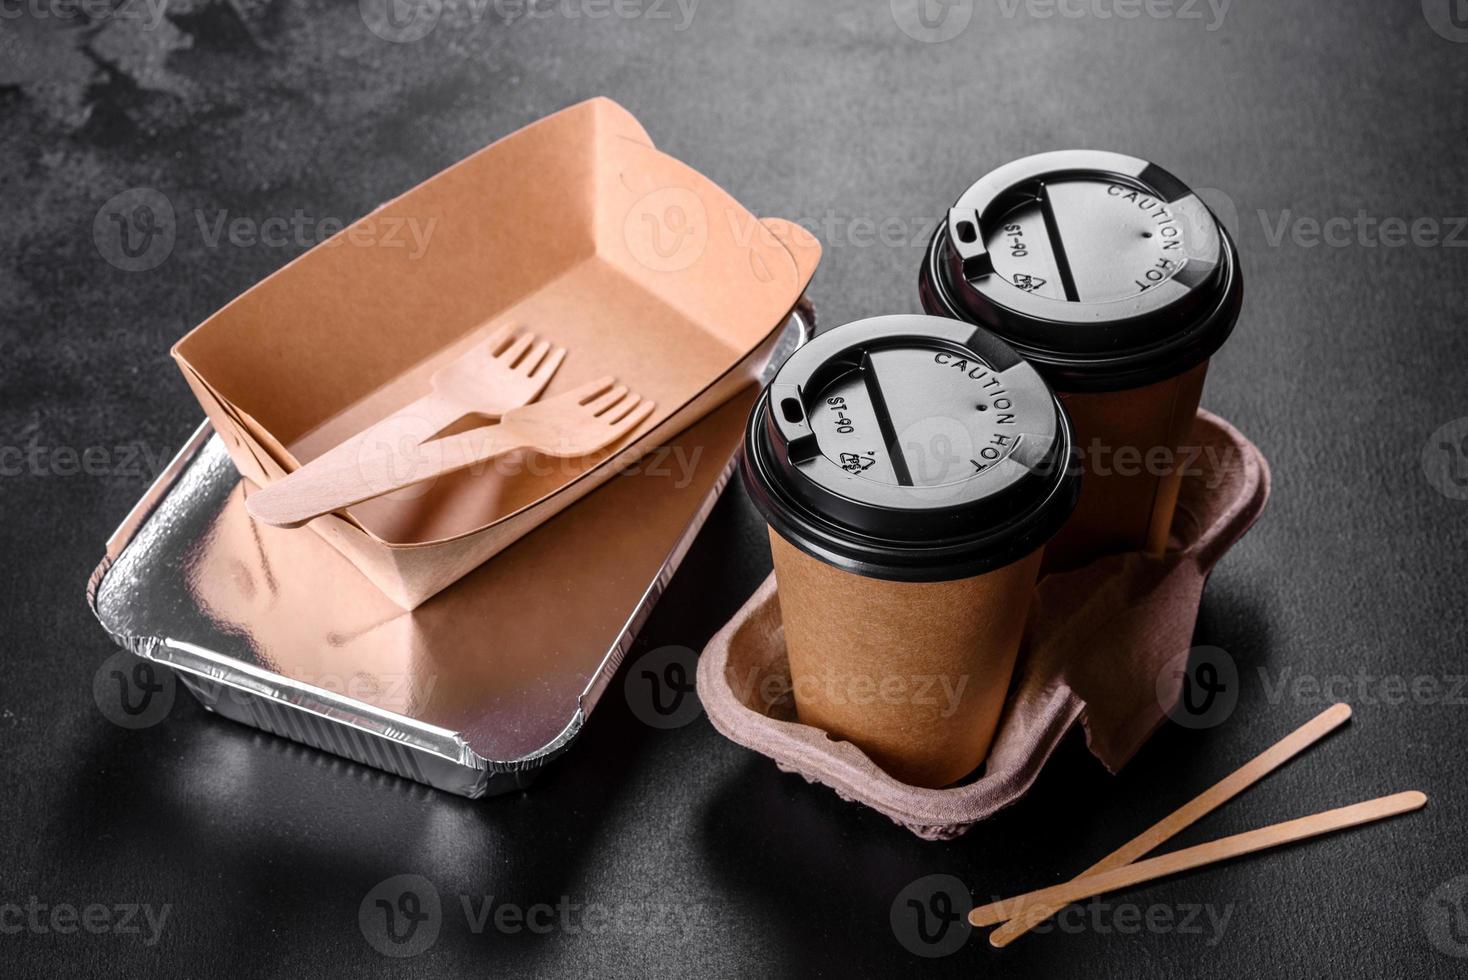 Disposable dishes made of environmentally friendly brown cardboard on a dark background photo